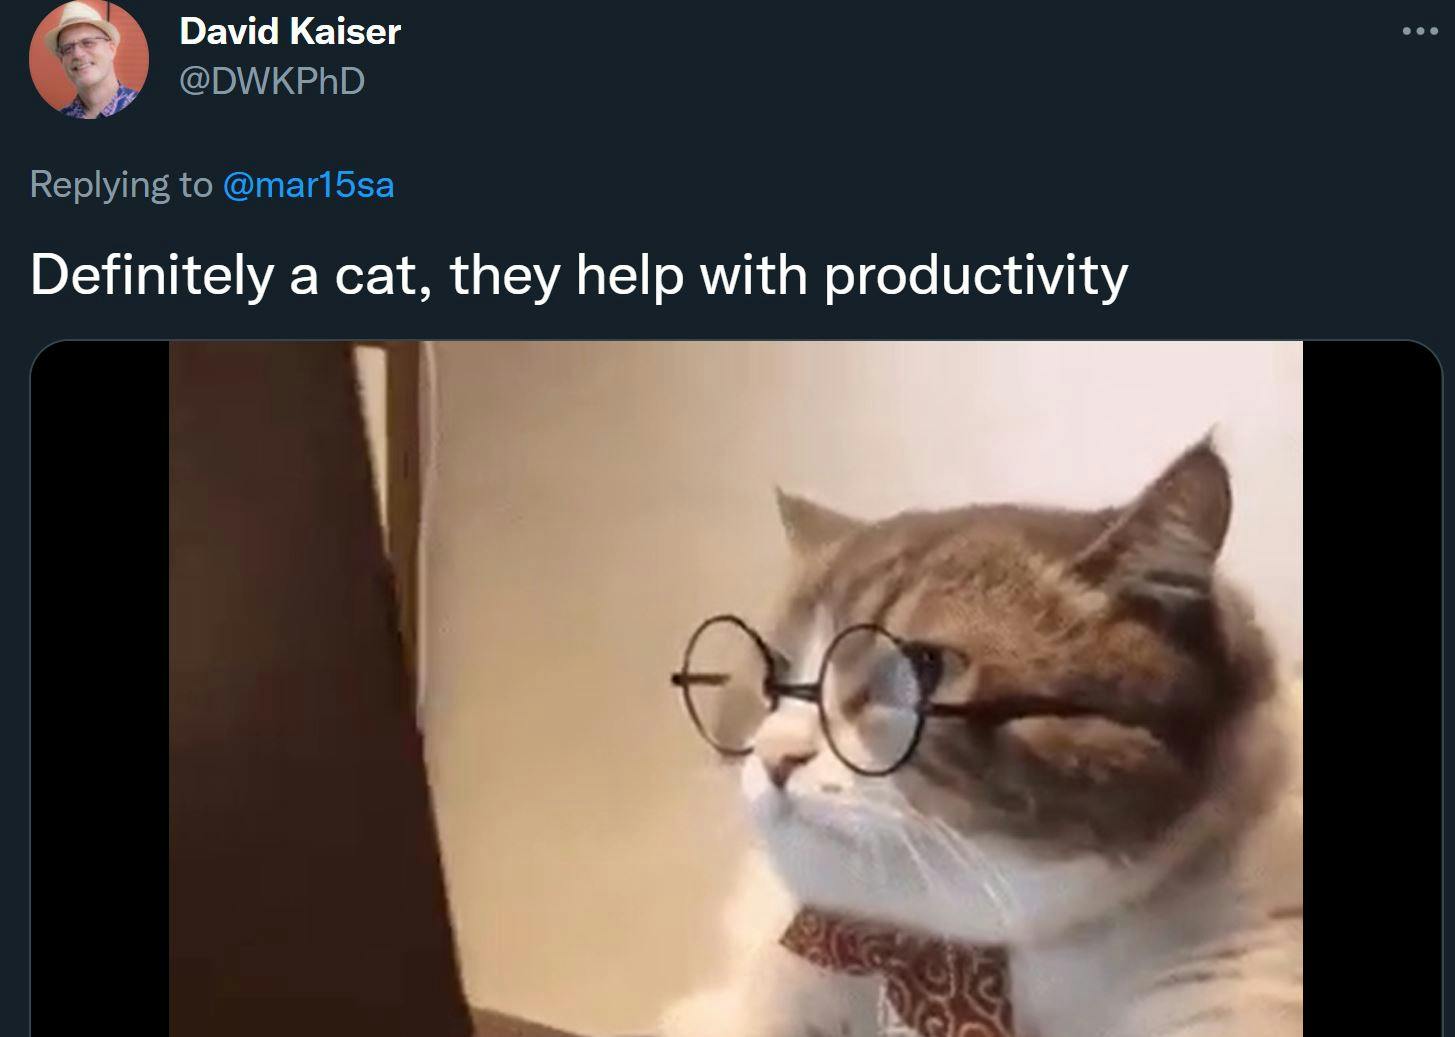 Definitely a cat, they help with productivity